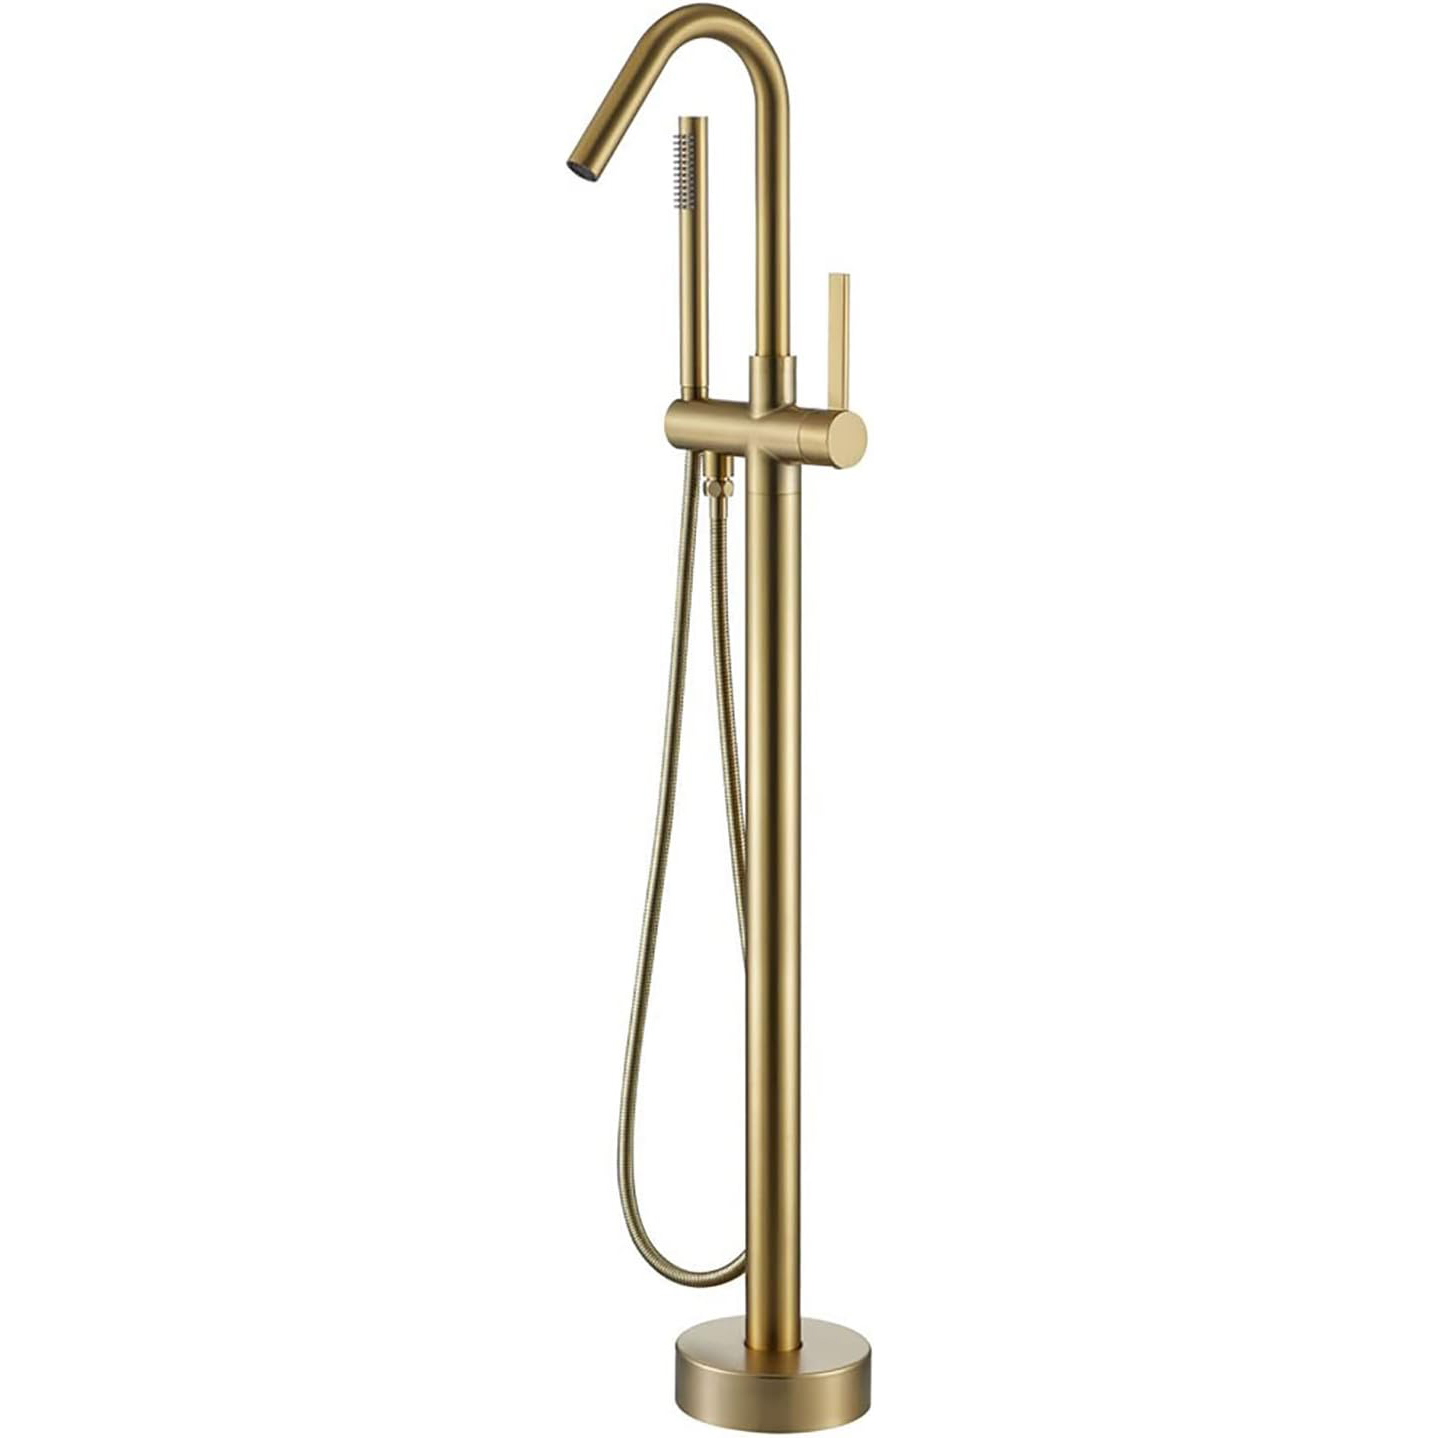 Wovier Floor Mounted Tub Filler Faucet, Freestanding Bathtub Faucet with Hand Shower W8791